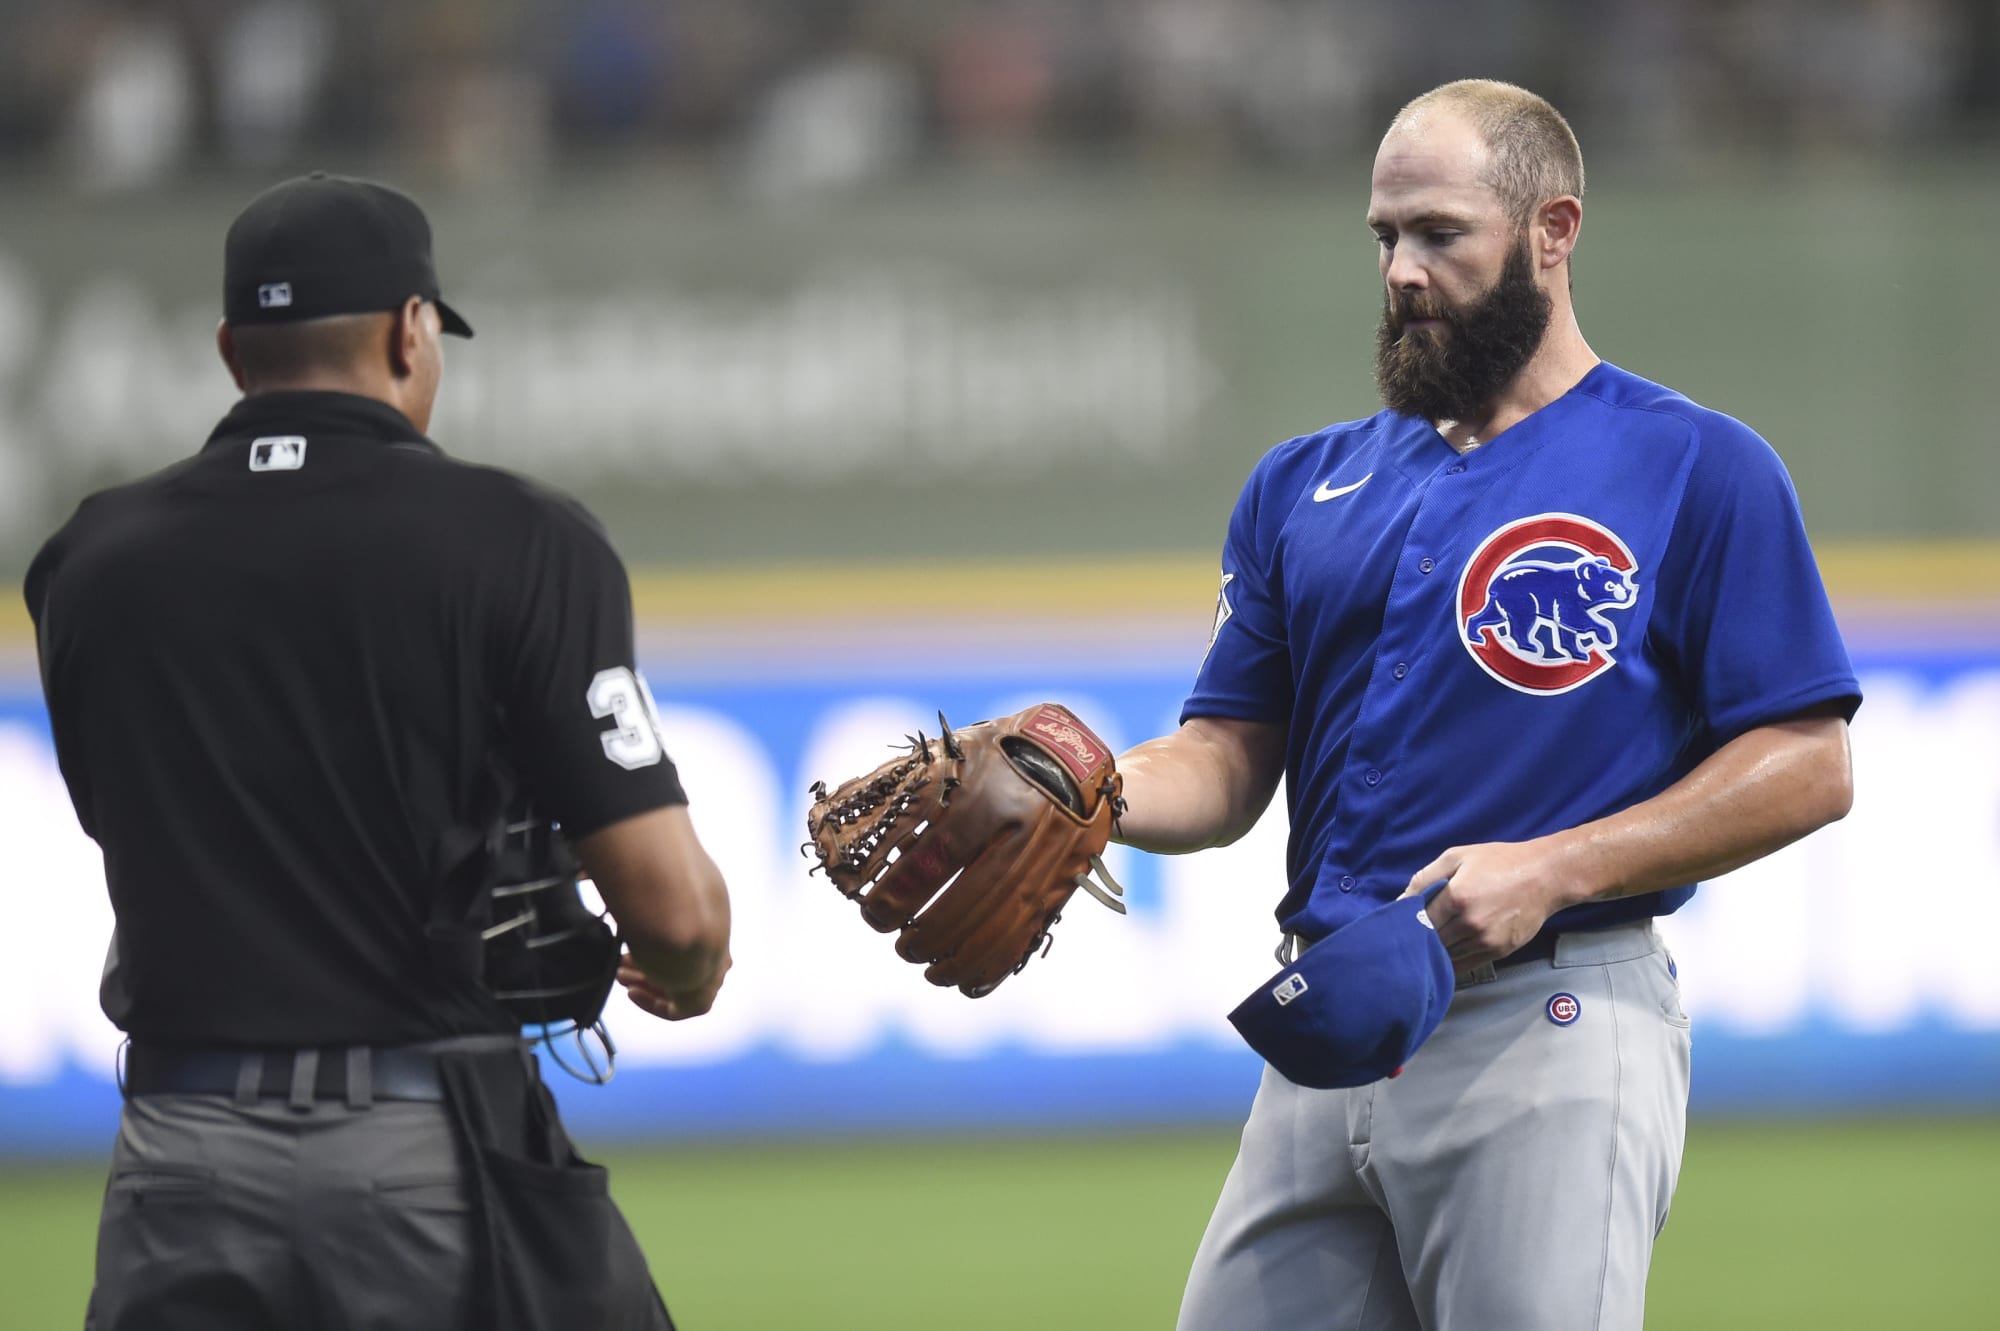 The Chicago Cubs are turning into trade deadline sellers